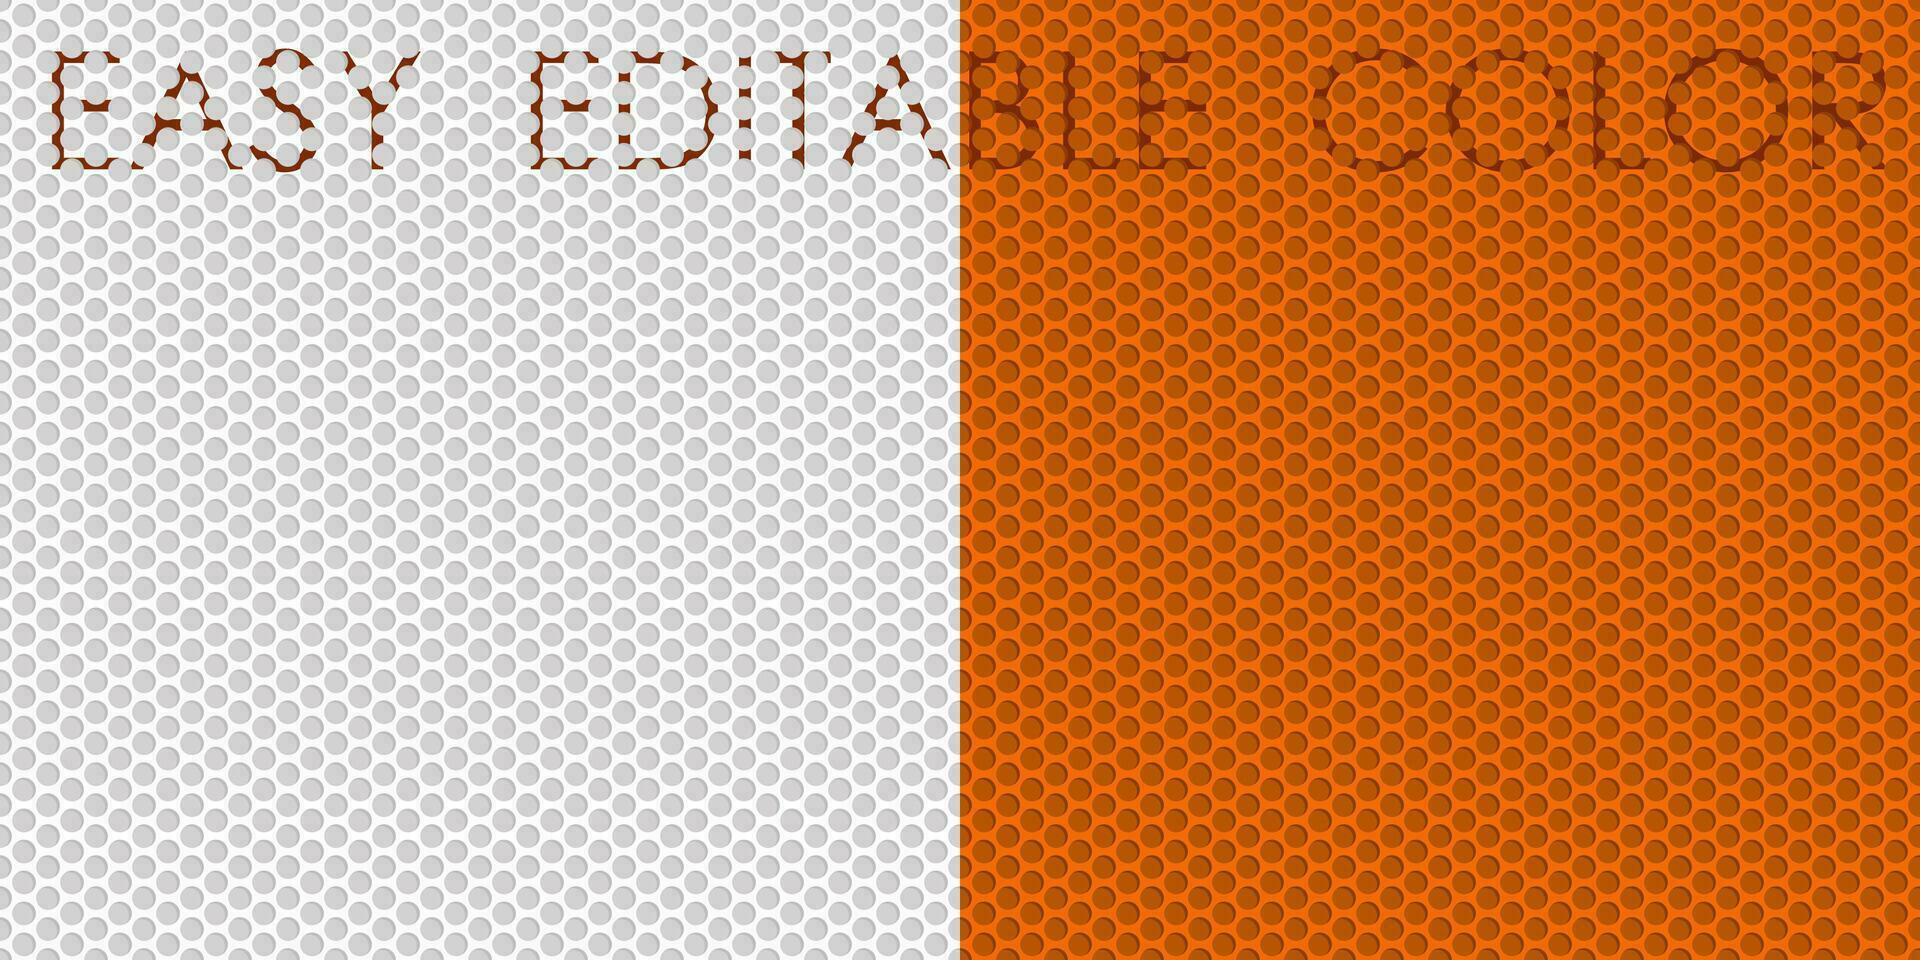 seamless pattern of metal mesh with textured surface of round cells. Industrial lightweight grid for frames and fences. Vector